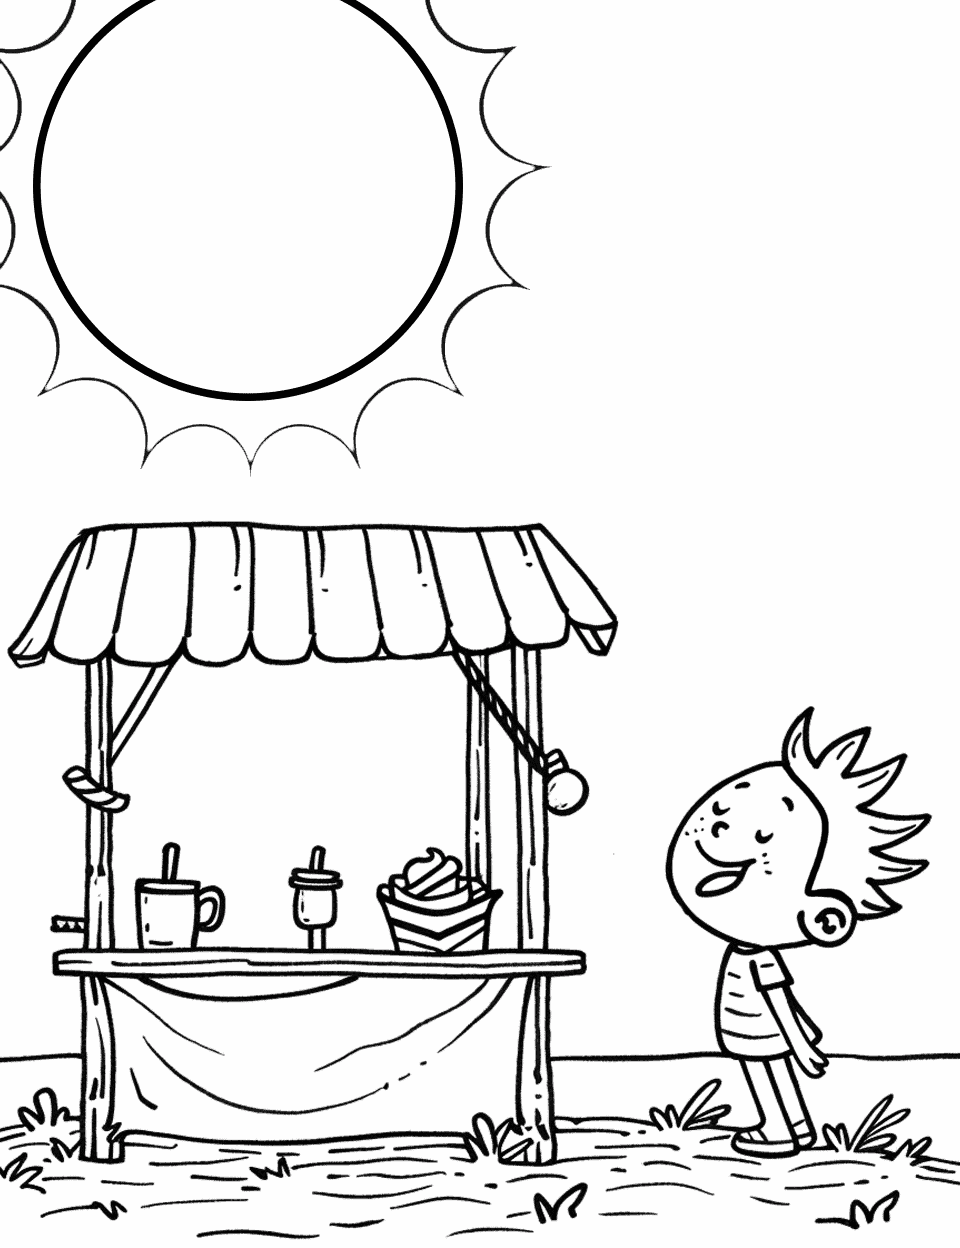 Summer Sun and Lemonade Stand Coloring Page - A child running a lemonade stand under the hot summer sun.